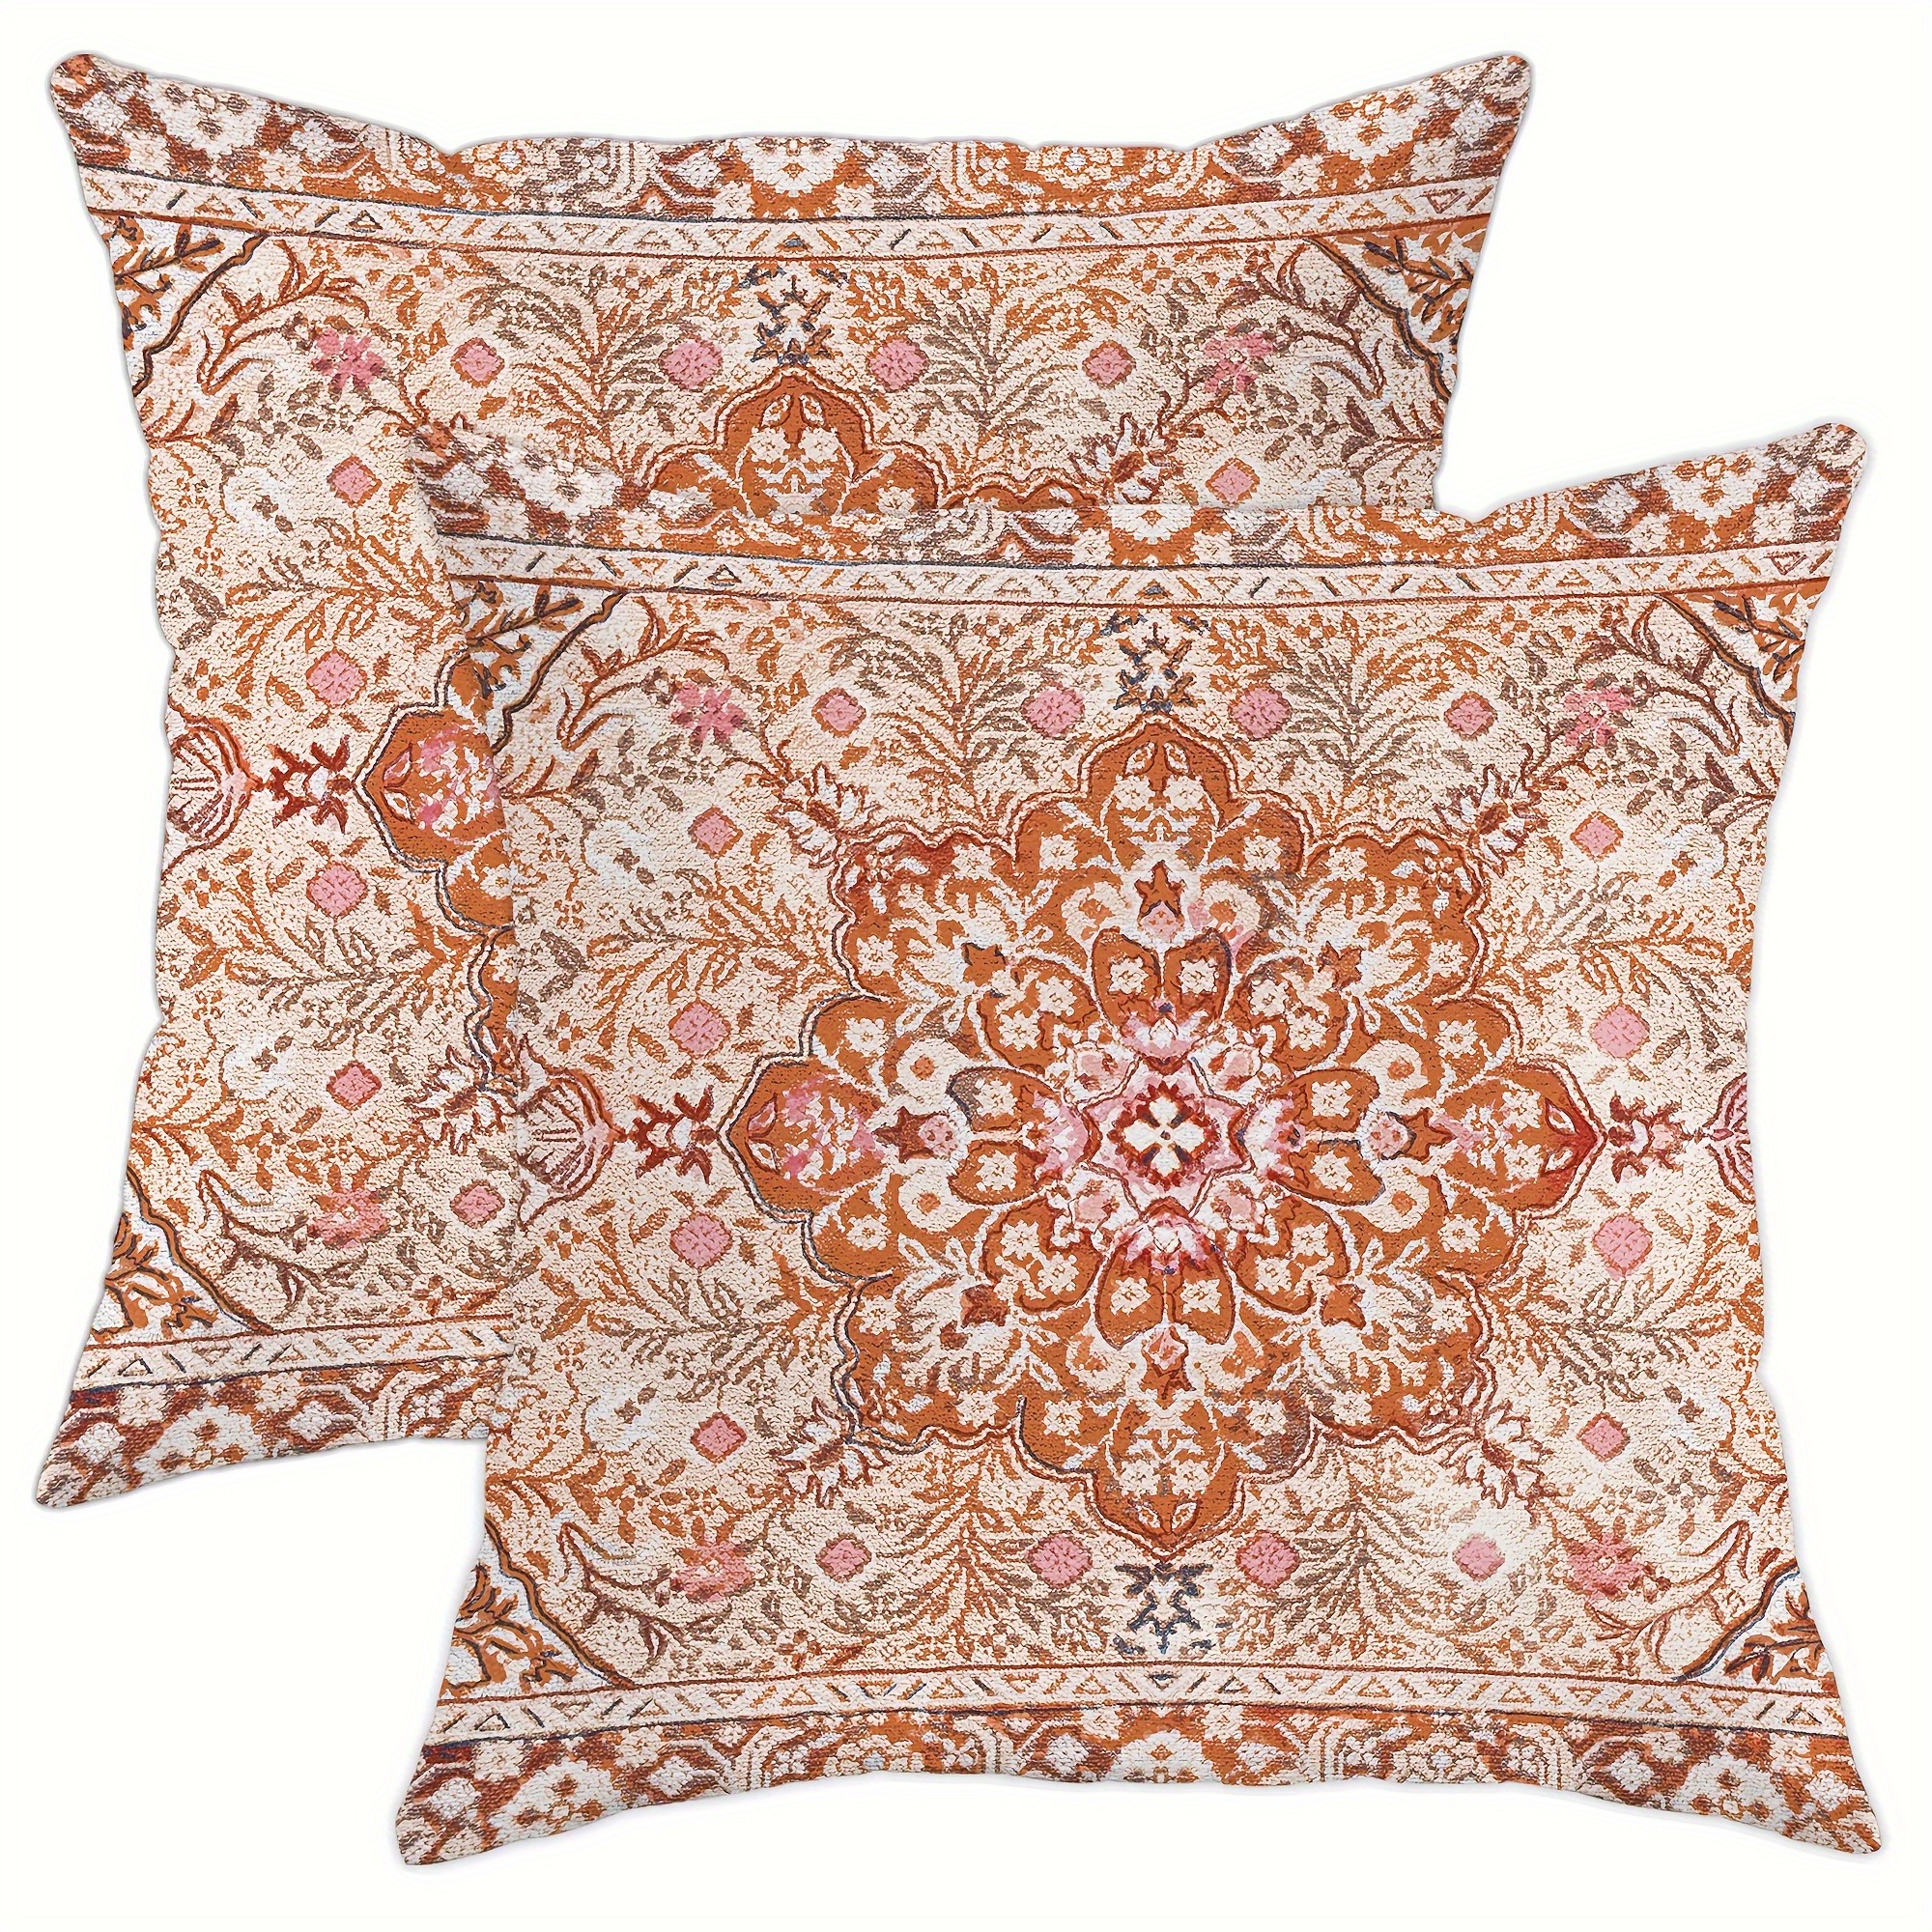 

2pcs, Floral Orange Polyester Throw Pillow Covers, Vintage Persian Ethnic Style Abstract Bohemian Pillow Covers, Decorative Cushion Covers 45×45cm/18 "x18" For Living Room Bedroom Sofa Bed Decoration